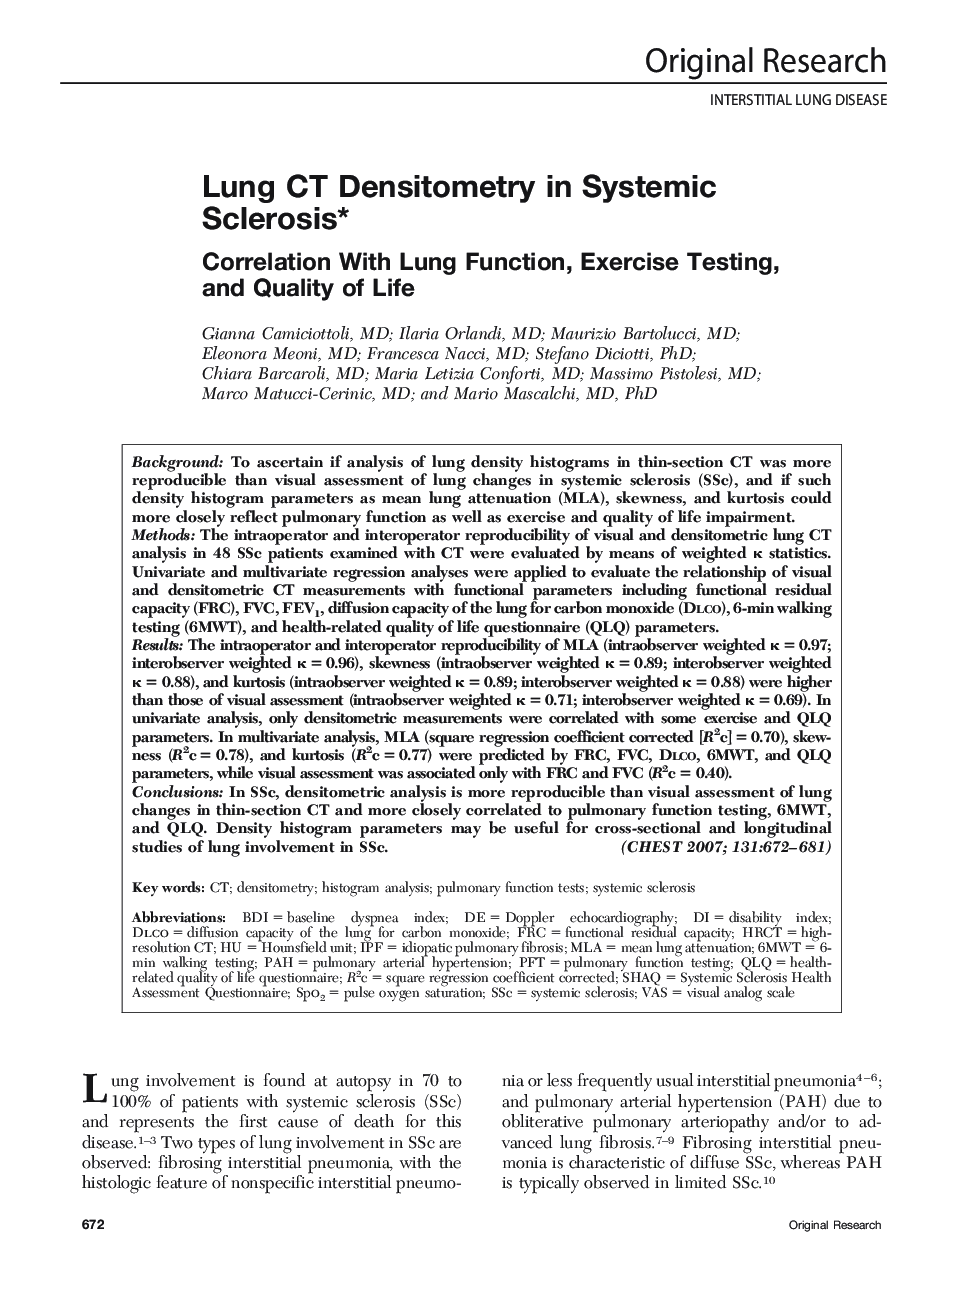 Lung CT Densitometry in Systemic Sclerosis : Correlation With Lung Function, Exercise Testing, and Quality of Life